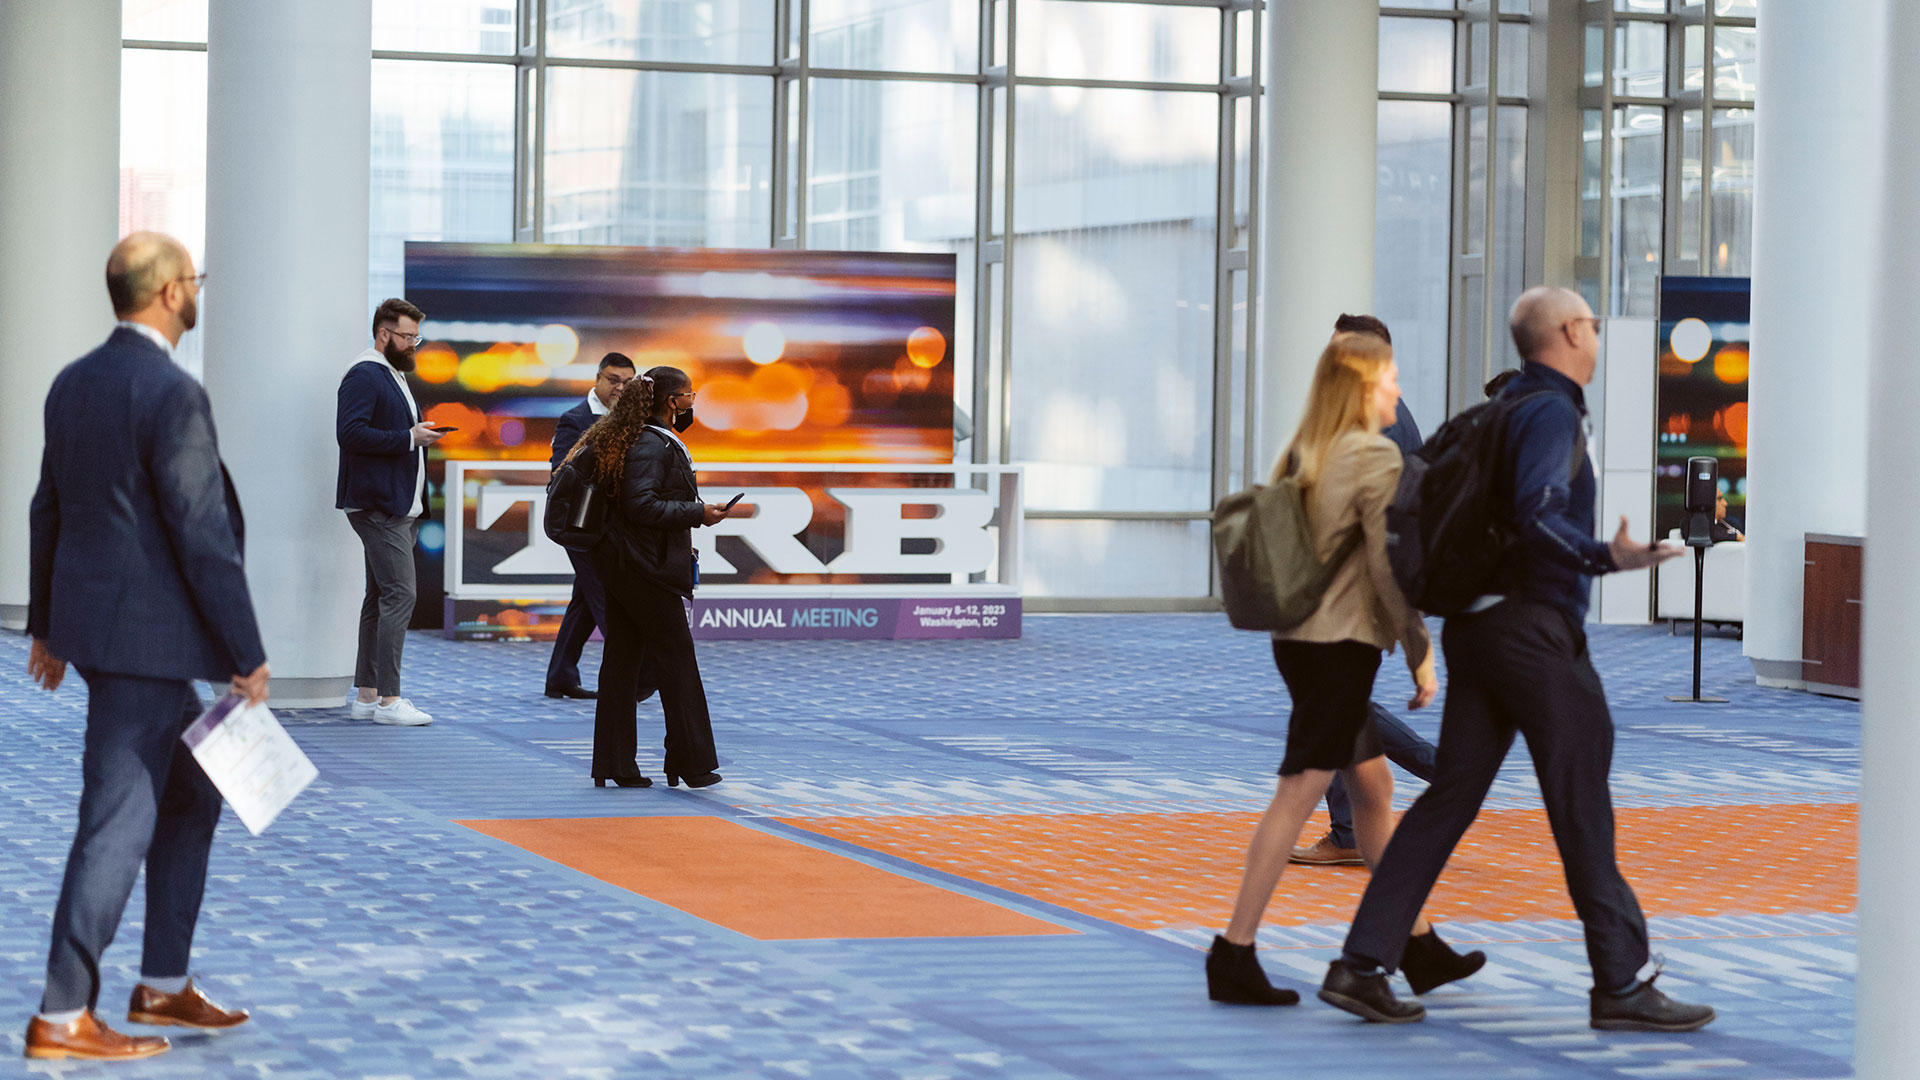 People walking across the Walter E. Washington Convention Center in front of a TRB 2023 sign